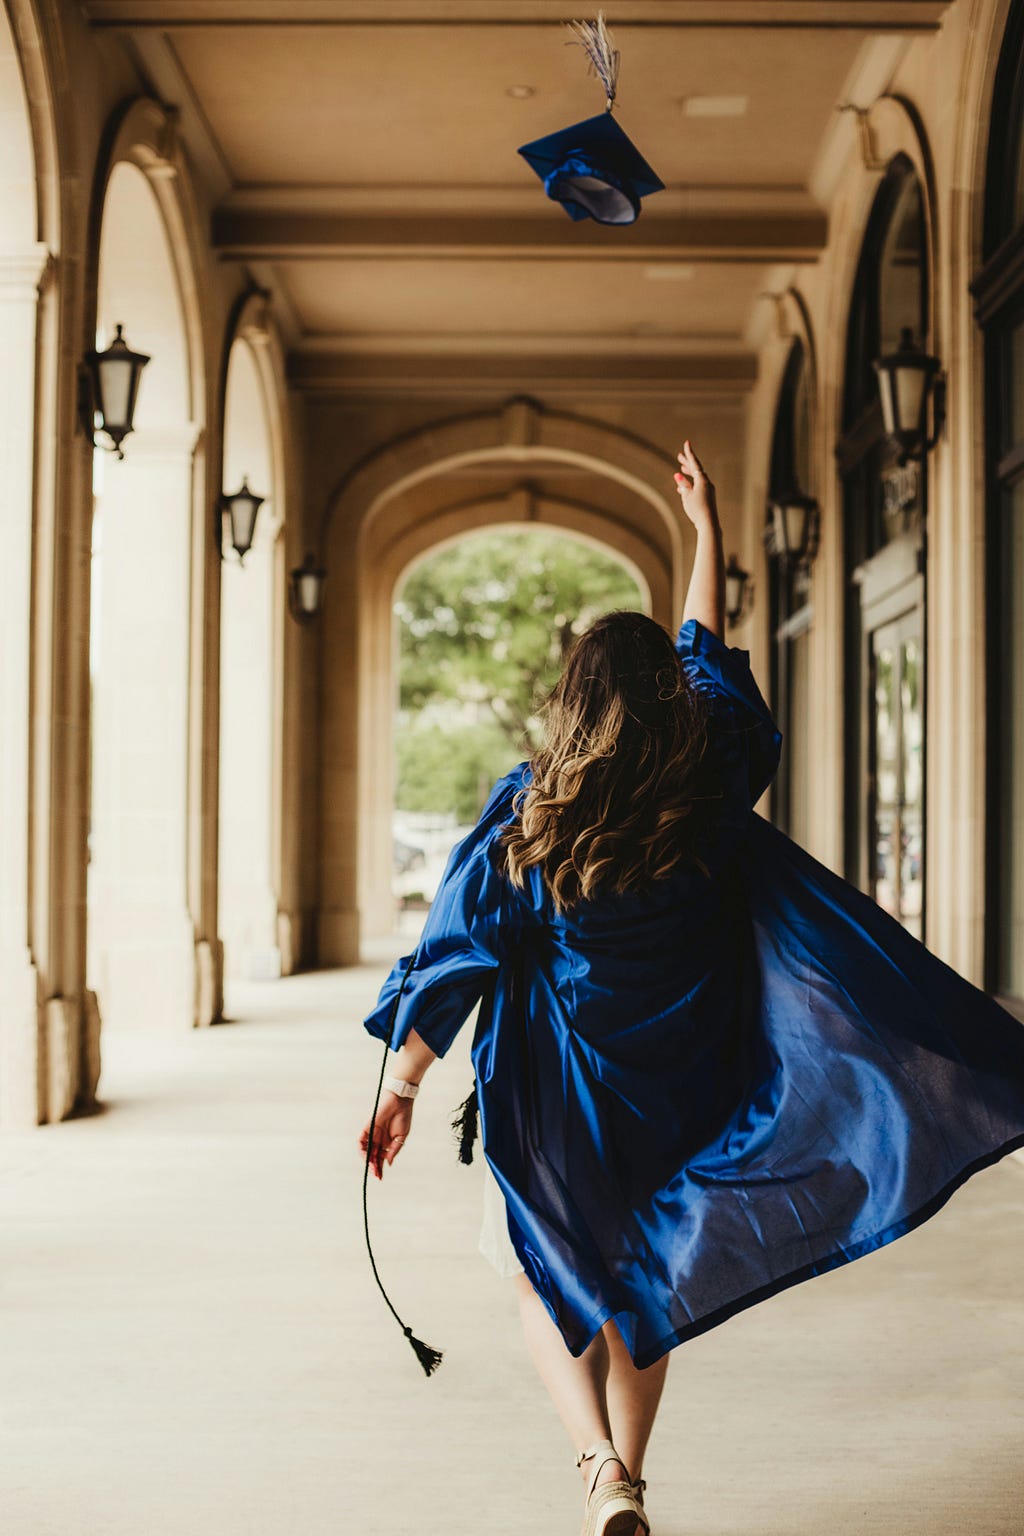 woman in a blue graduation gown throwing her graduation cap up in the air while walking